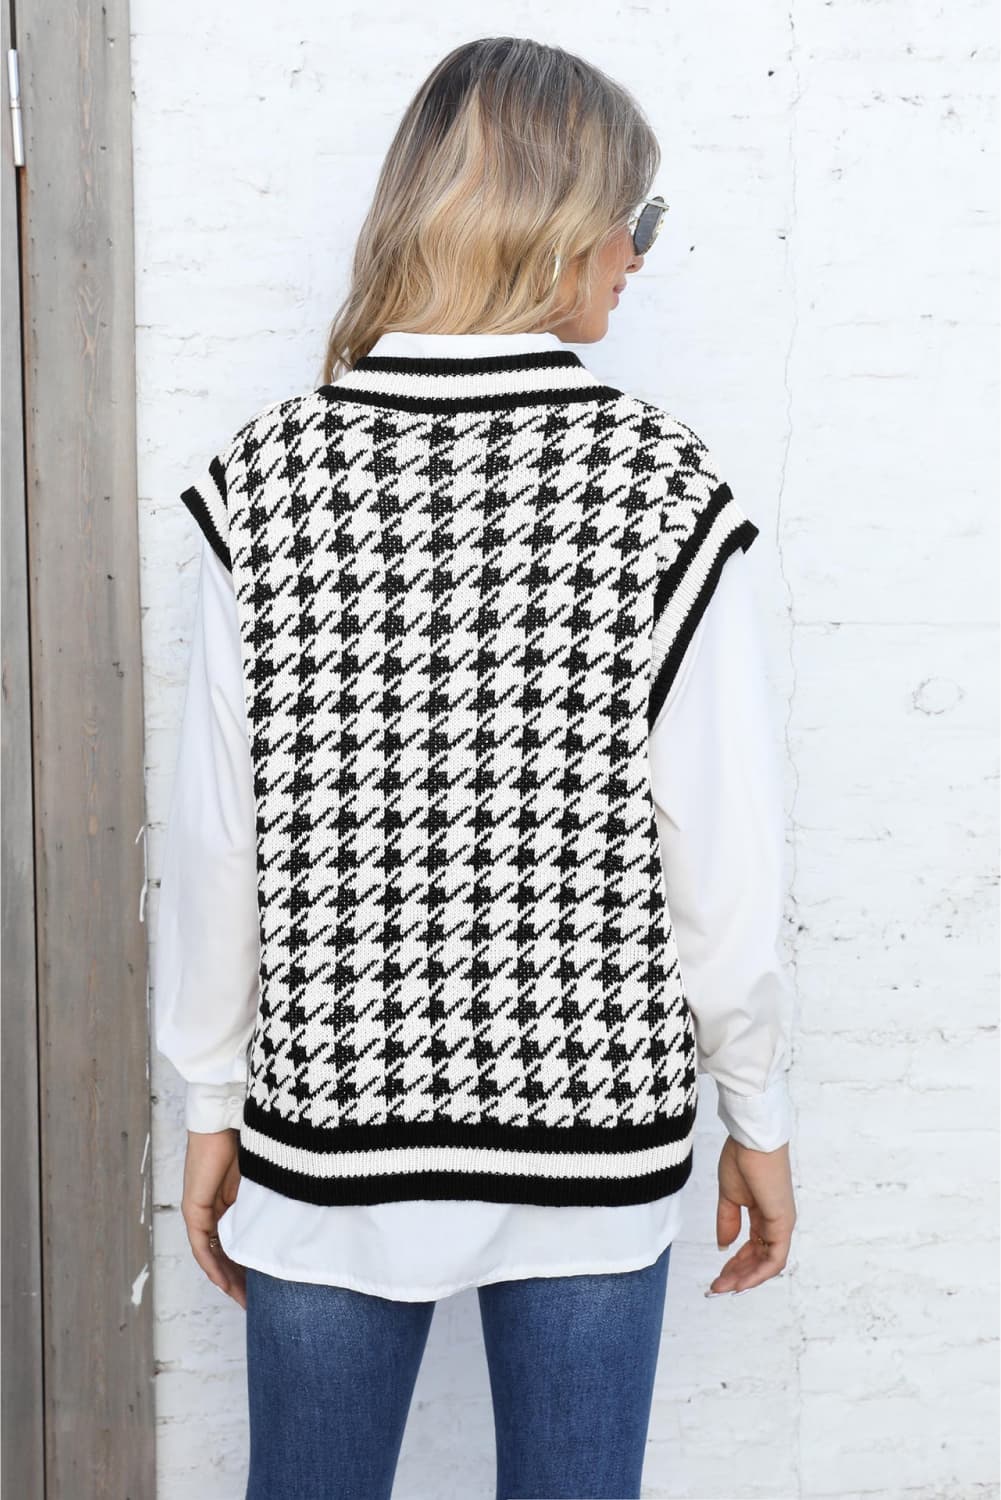 Parisian Vibes Houndstooth Sweater Vest - Lylah's